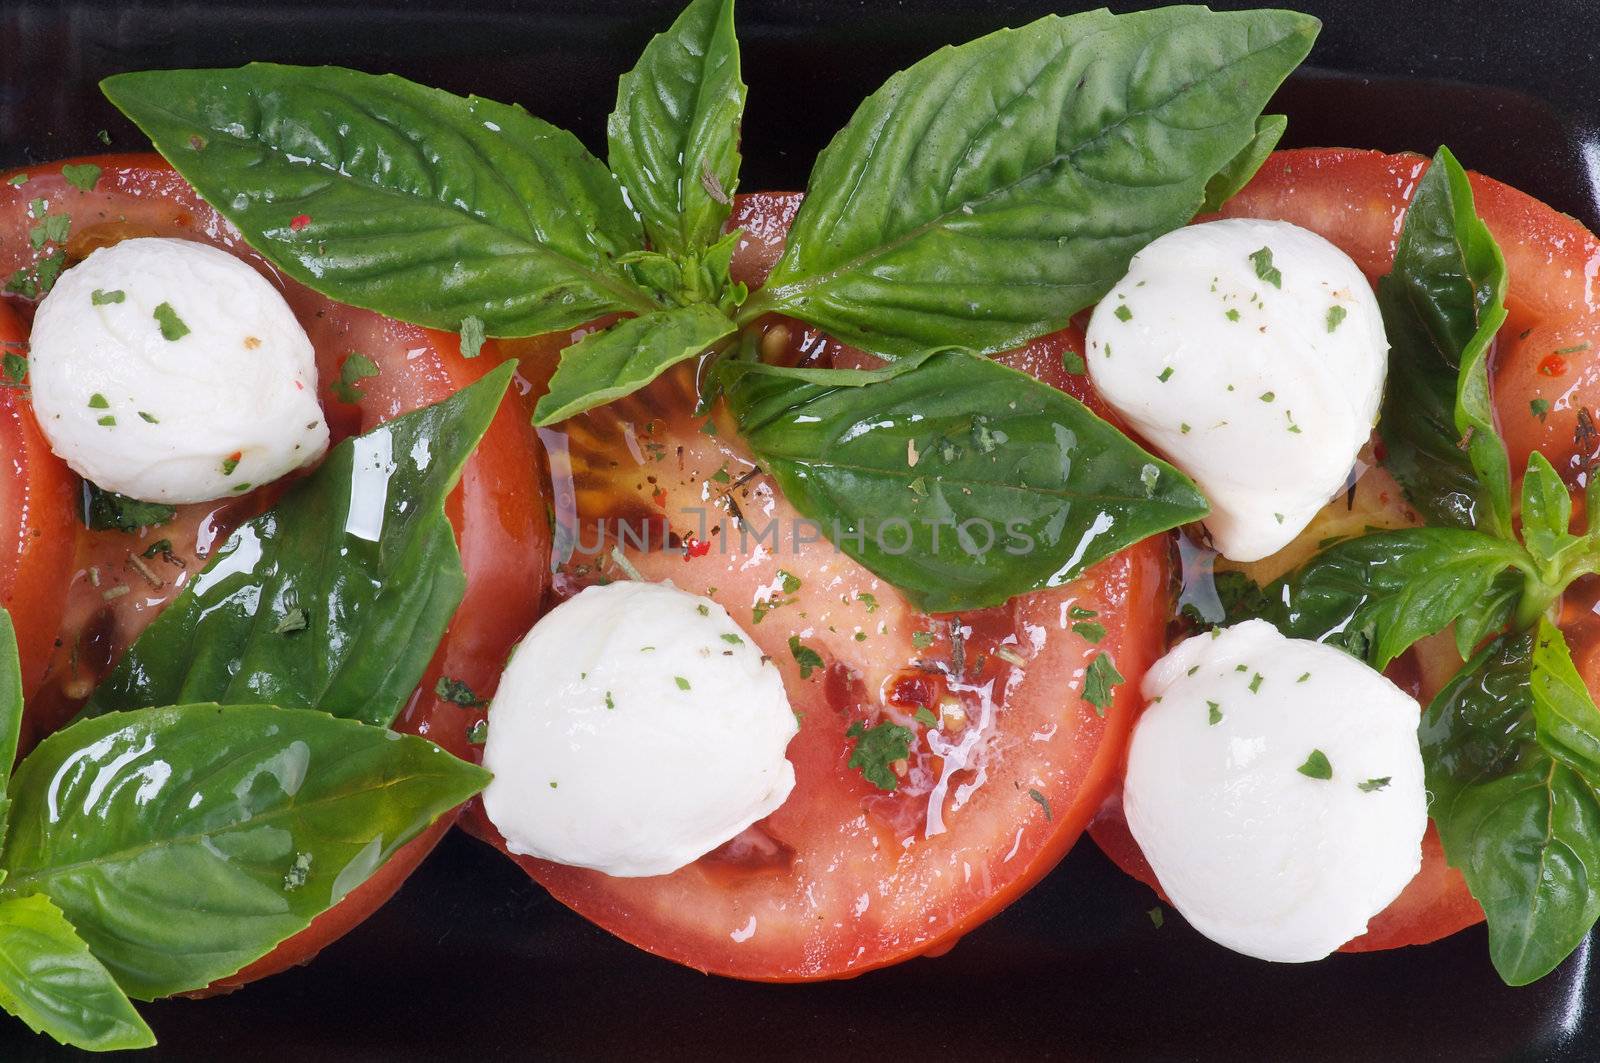 Italian Caprese Salad with Basil, Fresh Mozzarella, Tomatoes and Olive Oil on black plate close up